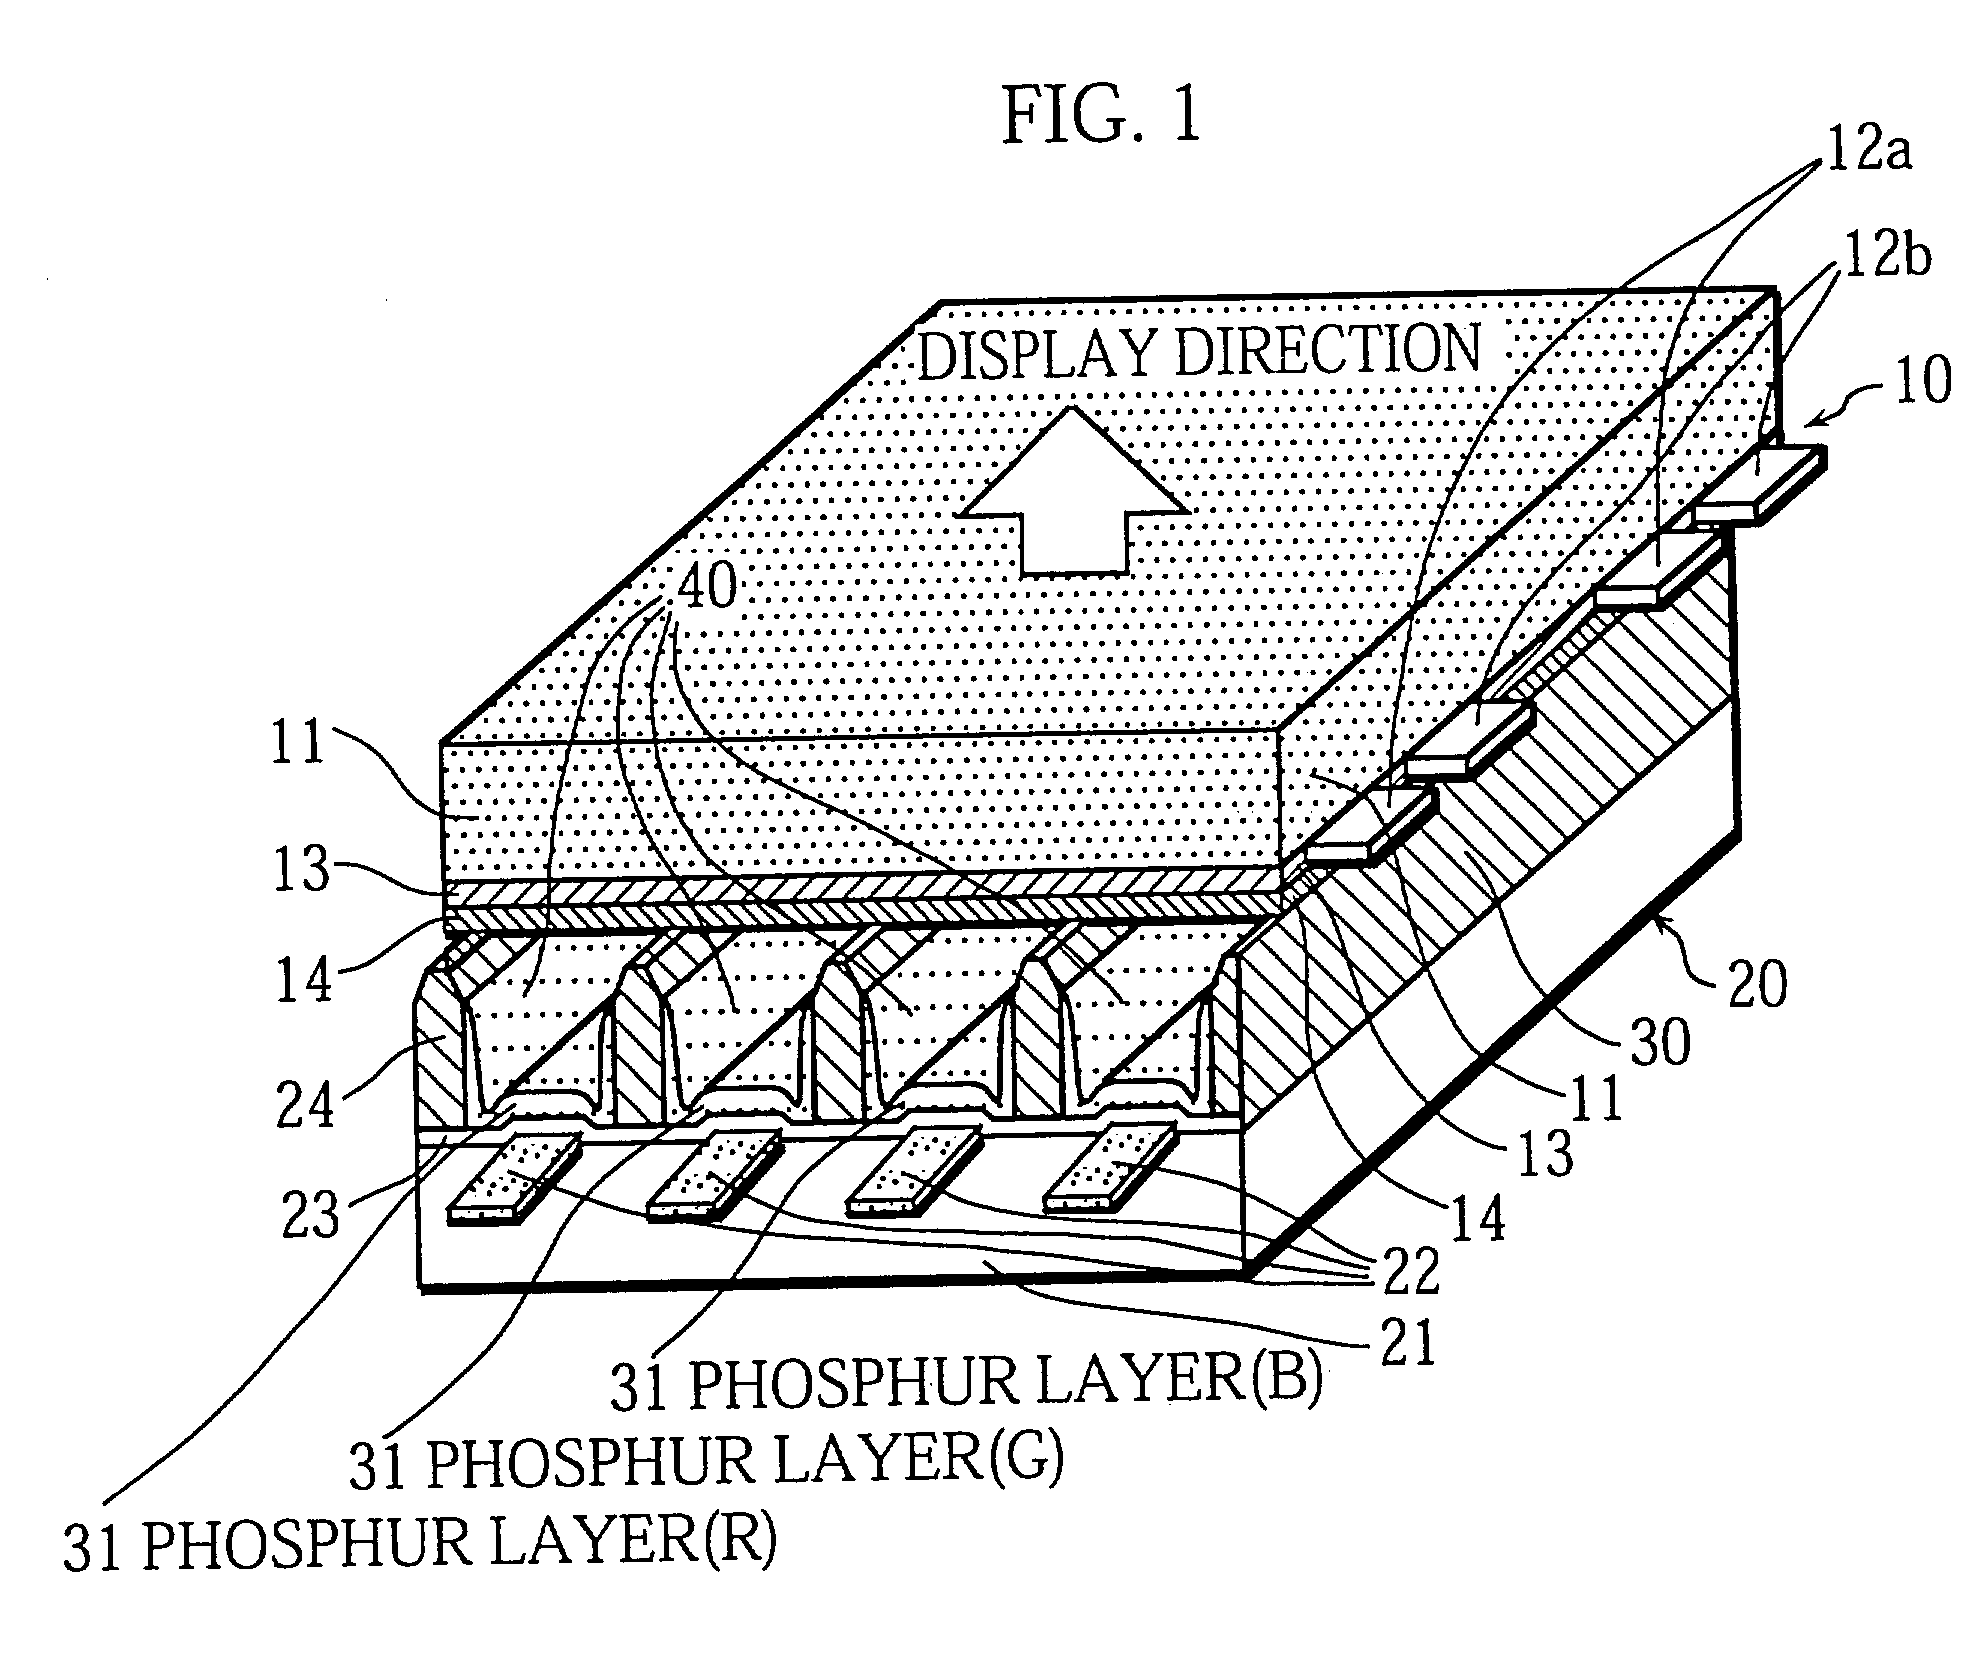 Plasma display panel manufacturing method for manufacturing a plasma display panel with superior picture quality, a manufacturing apparatus, and a phosphor ink